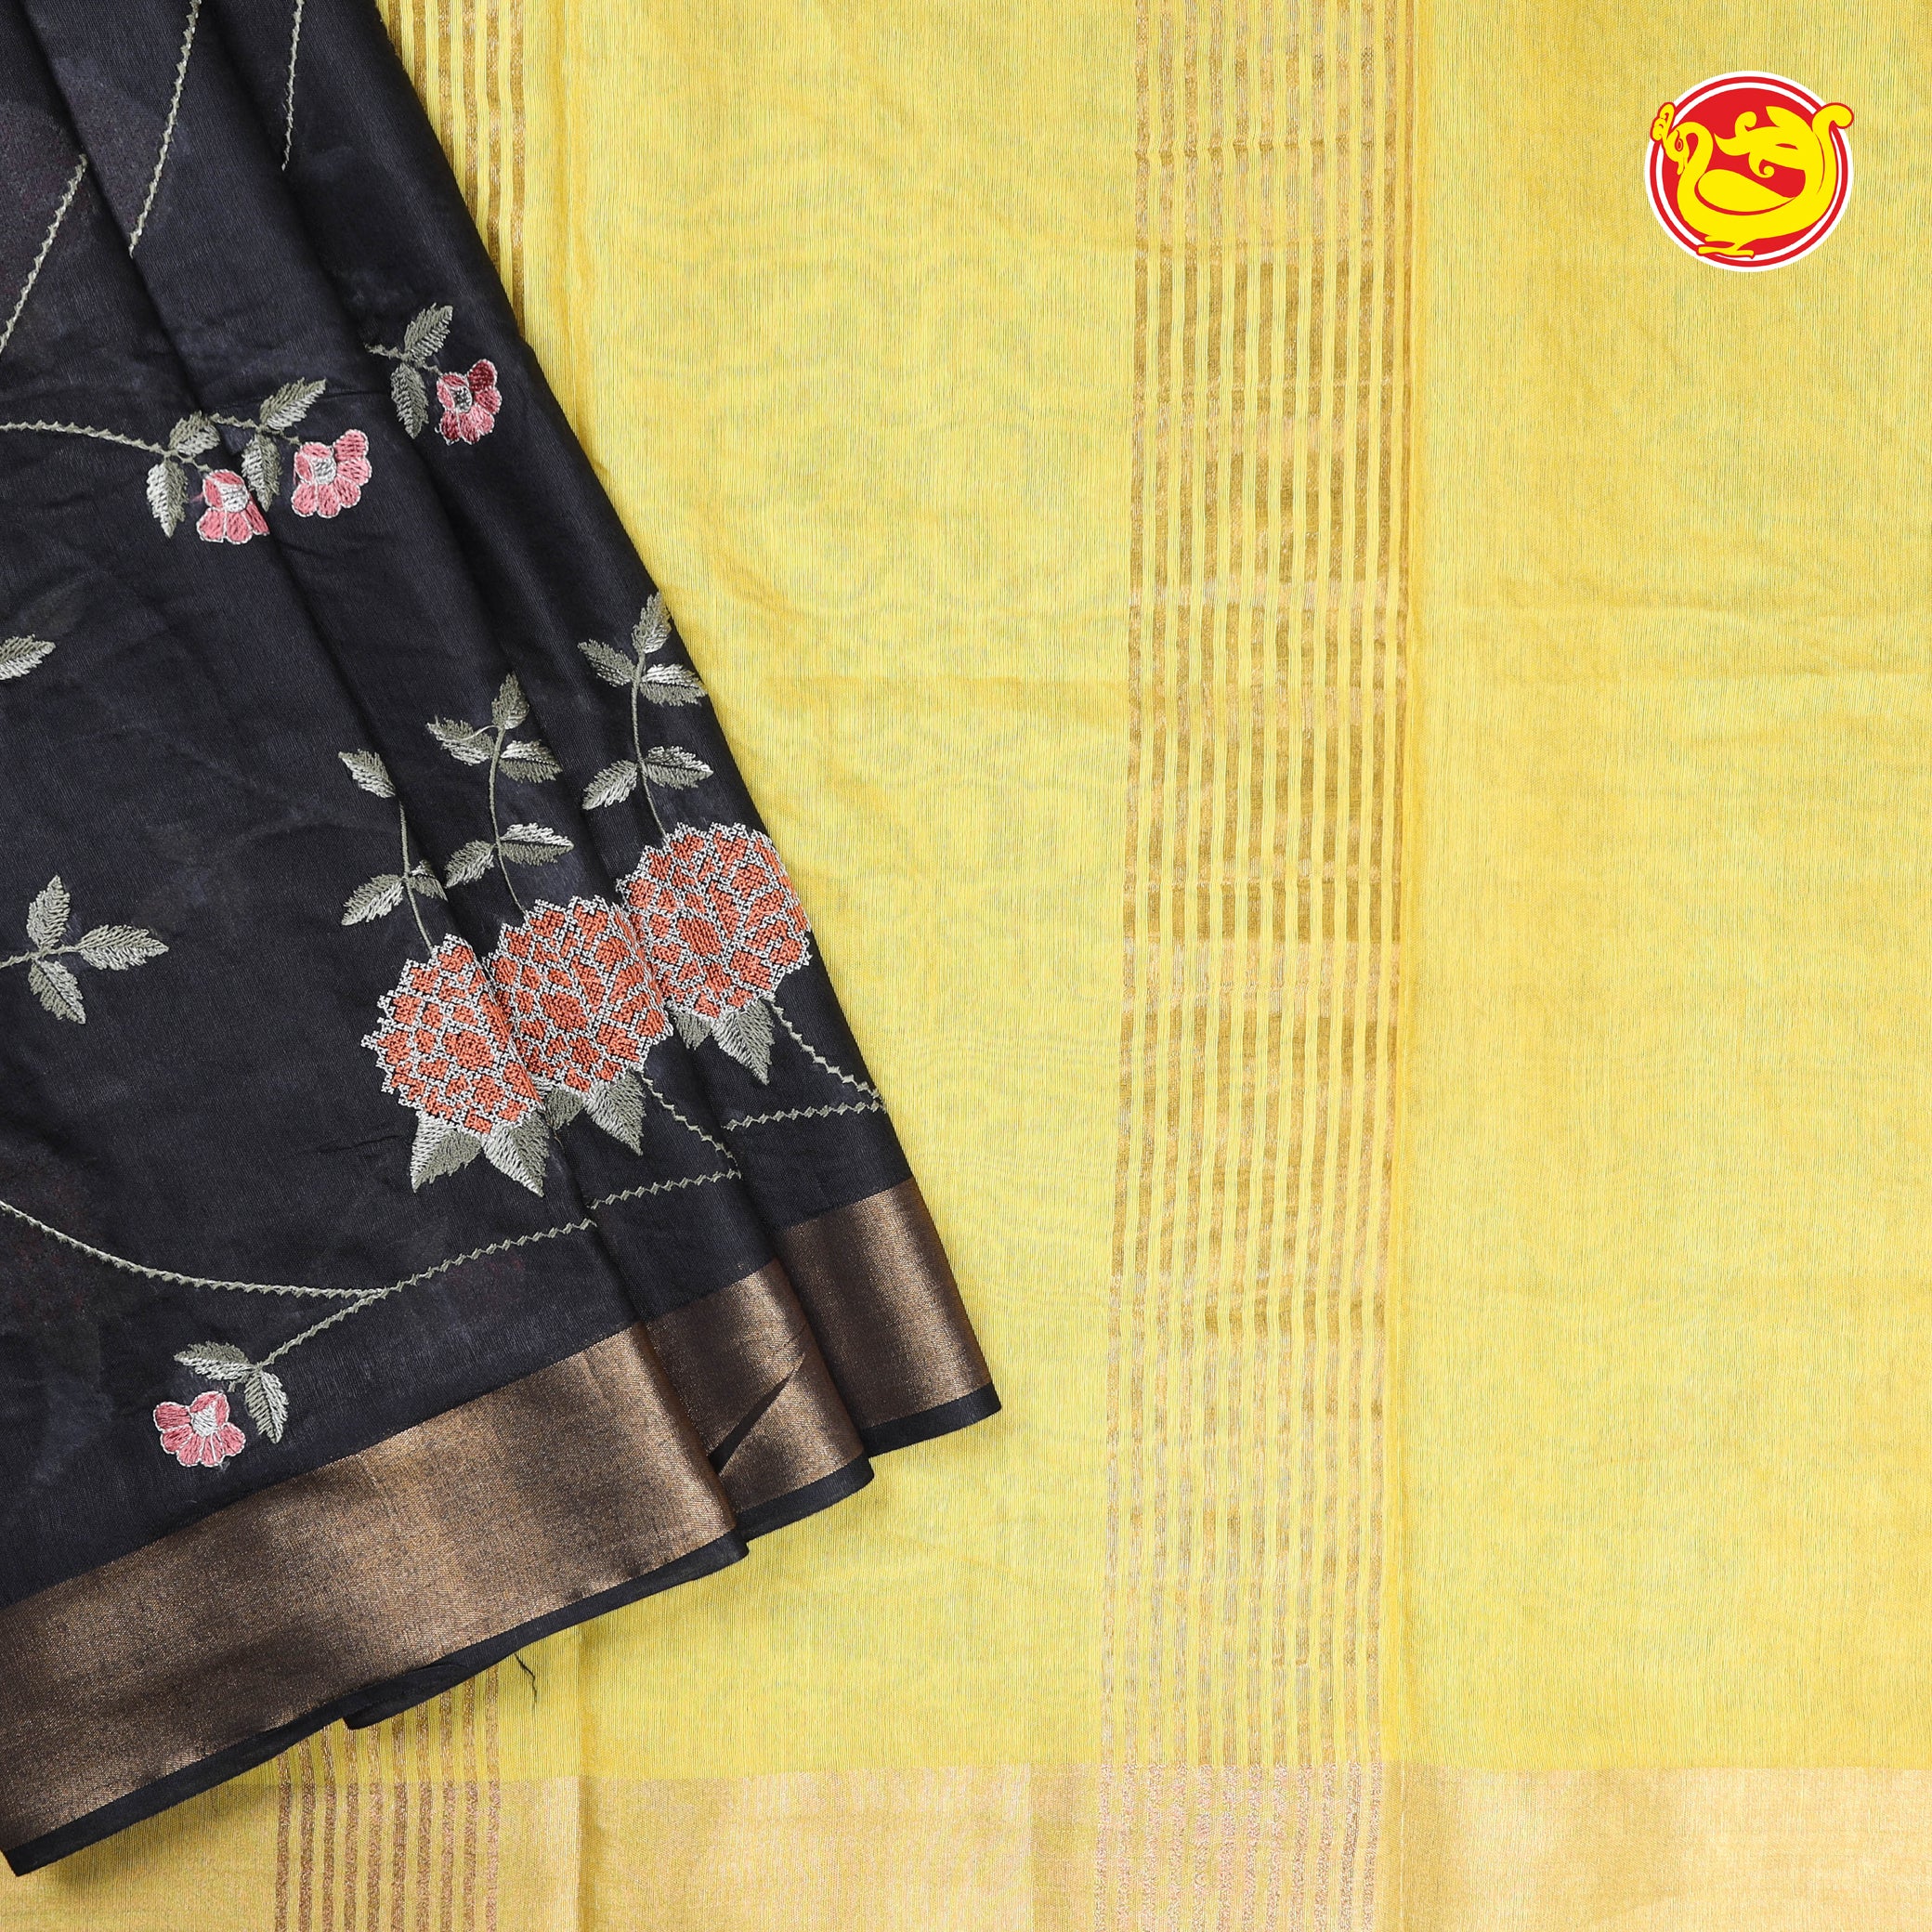 Black art tussar saree with embroidery